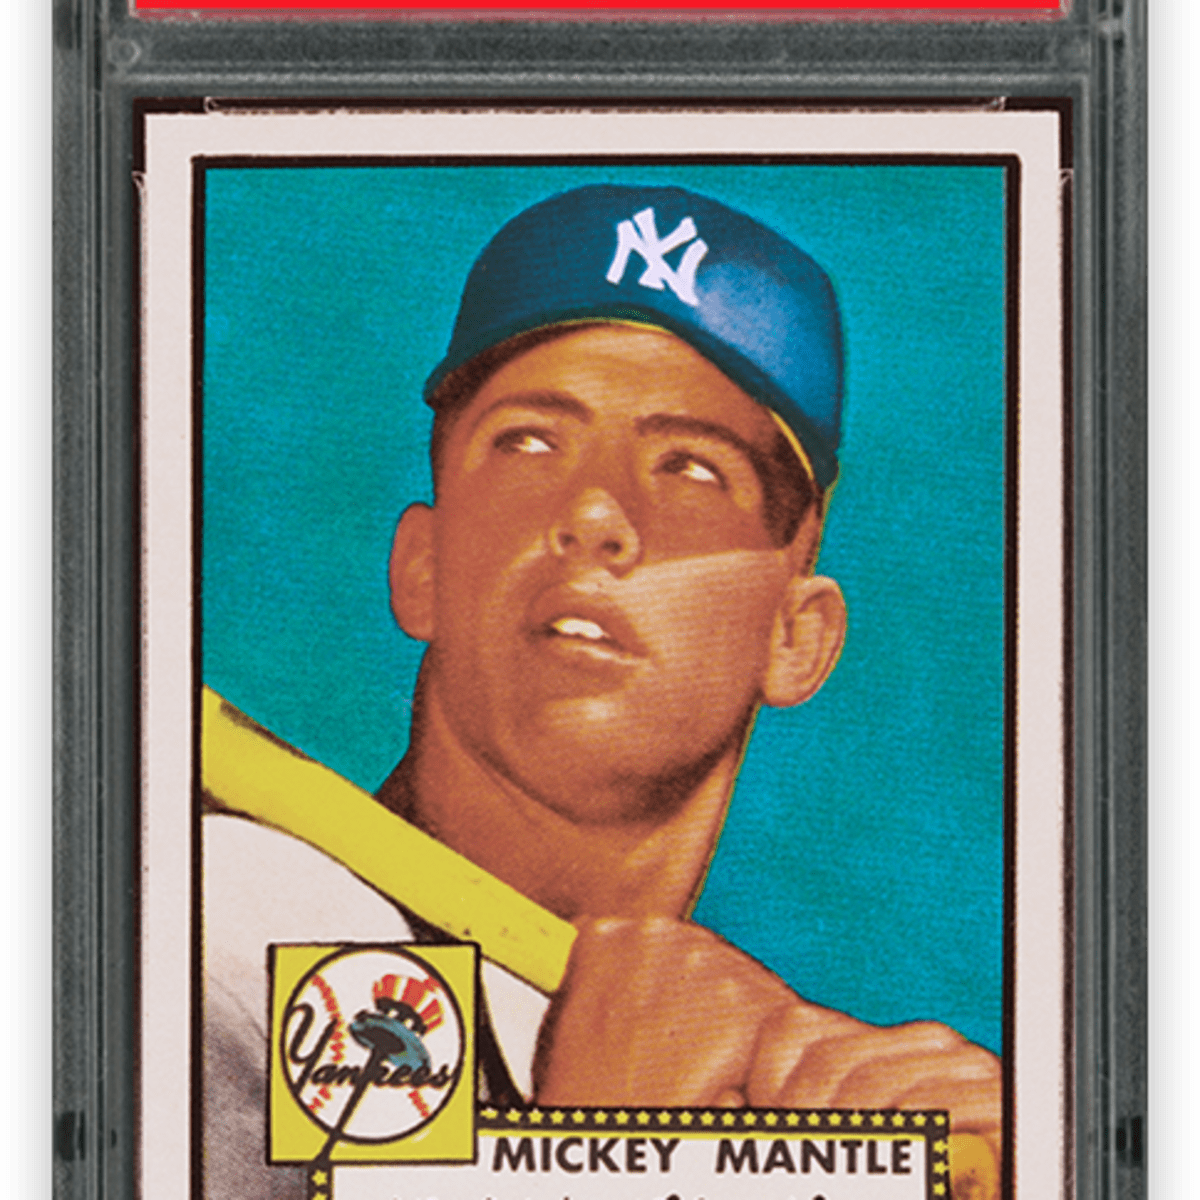 Mint-condition 1952 Mickey Mantle card to be displayed at MLB All 